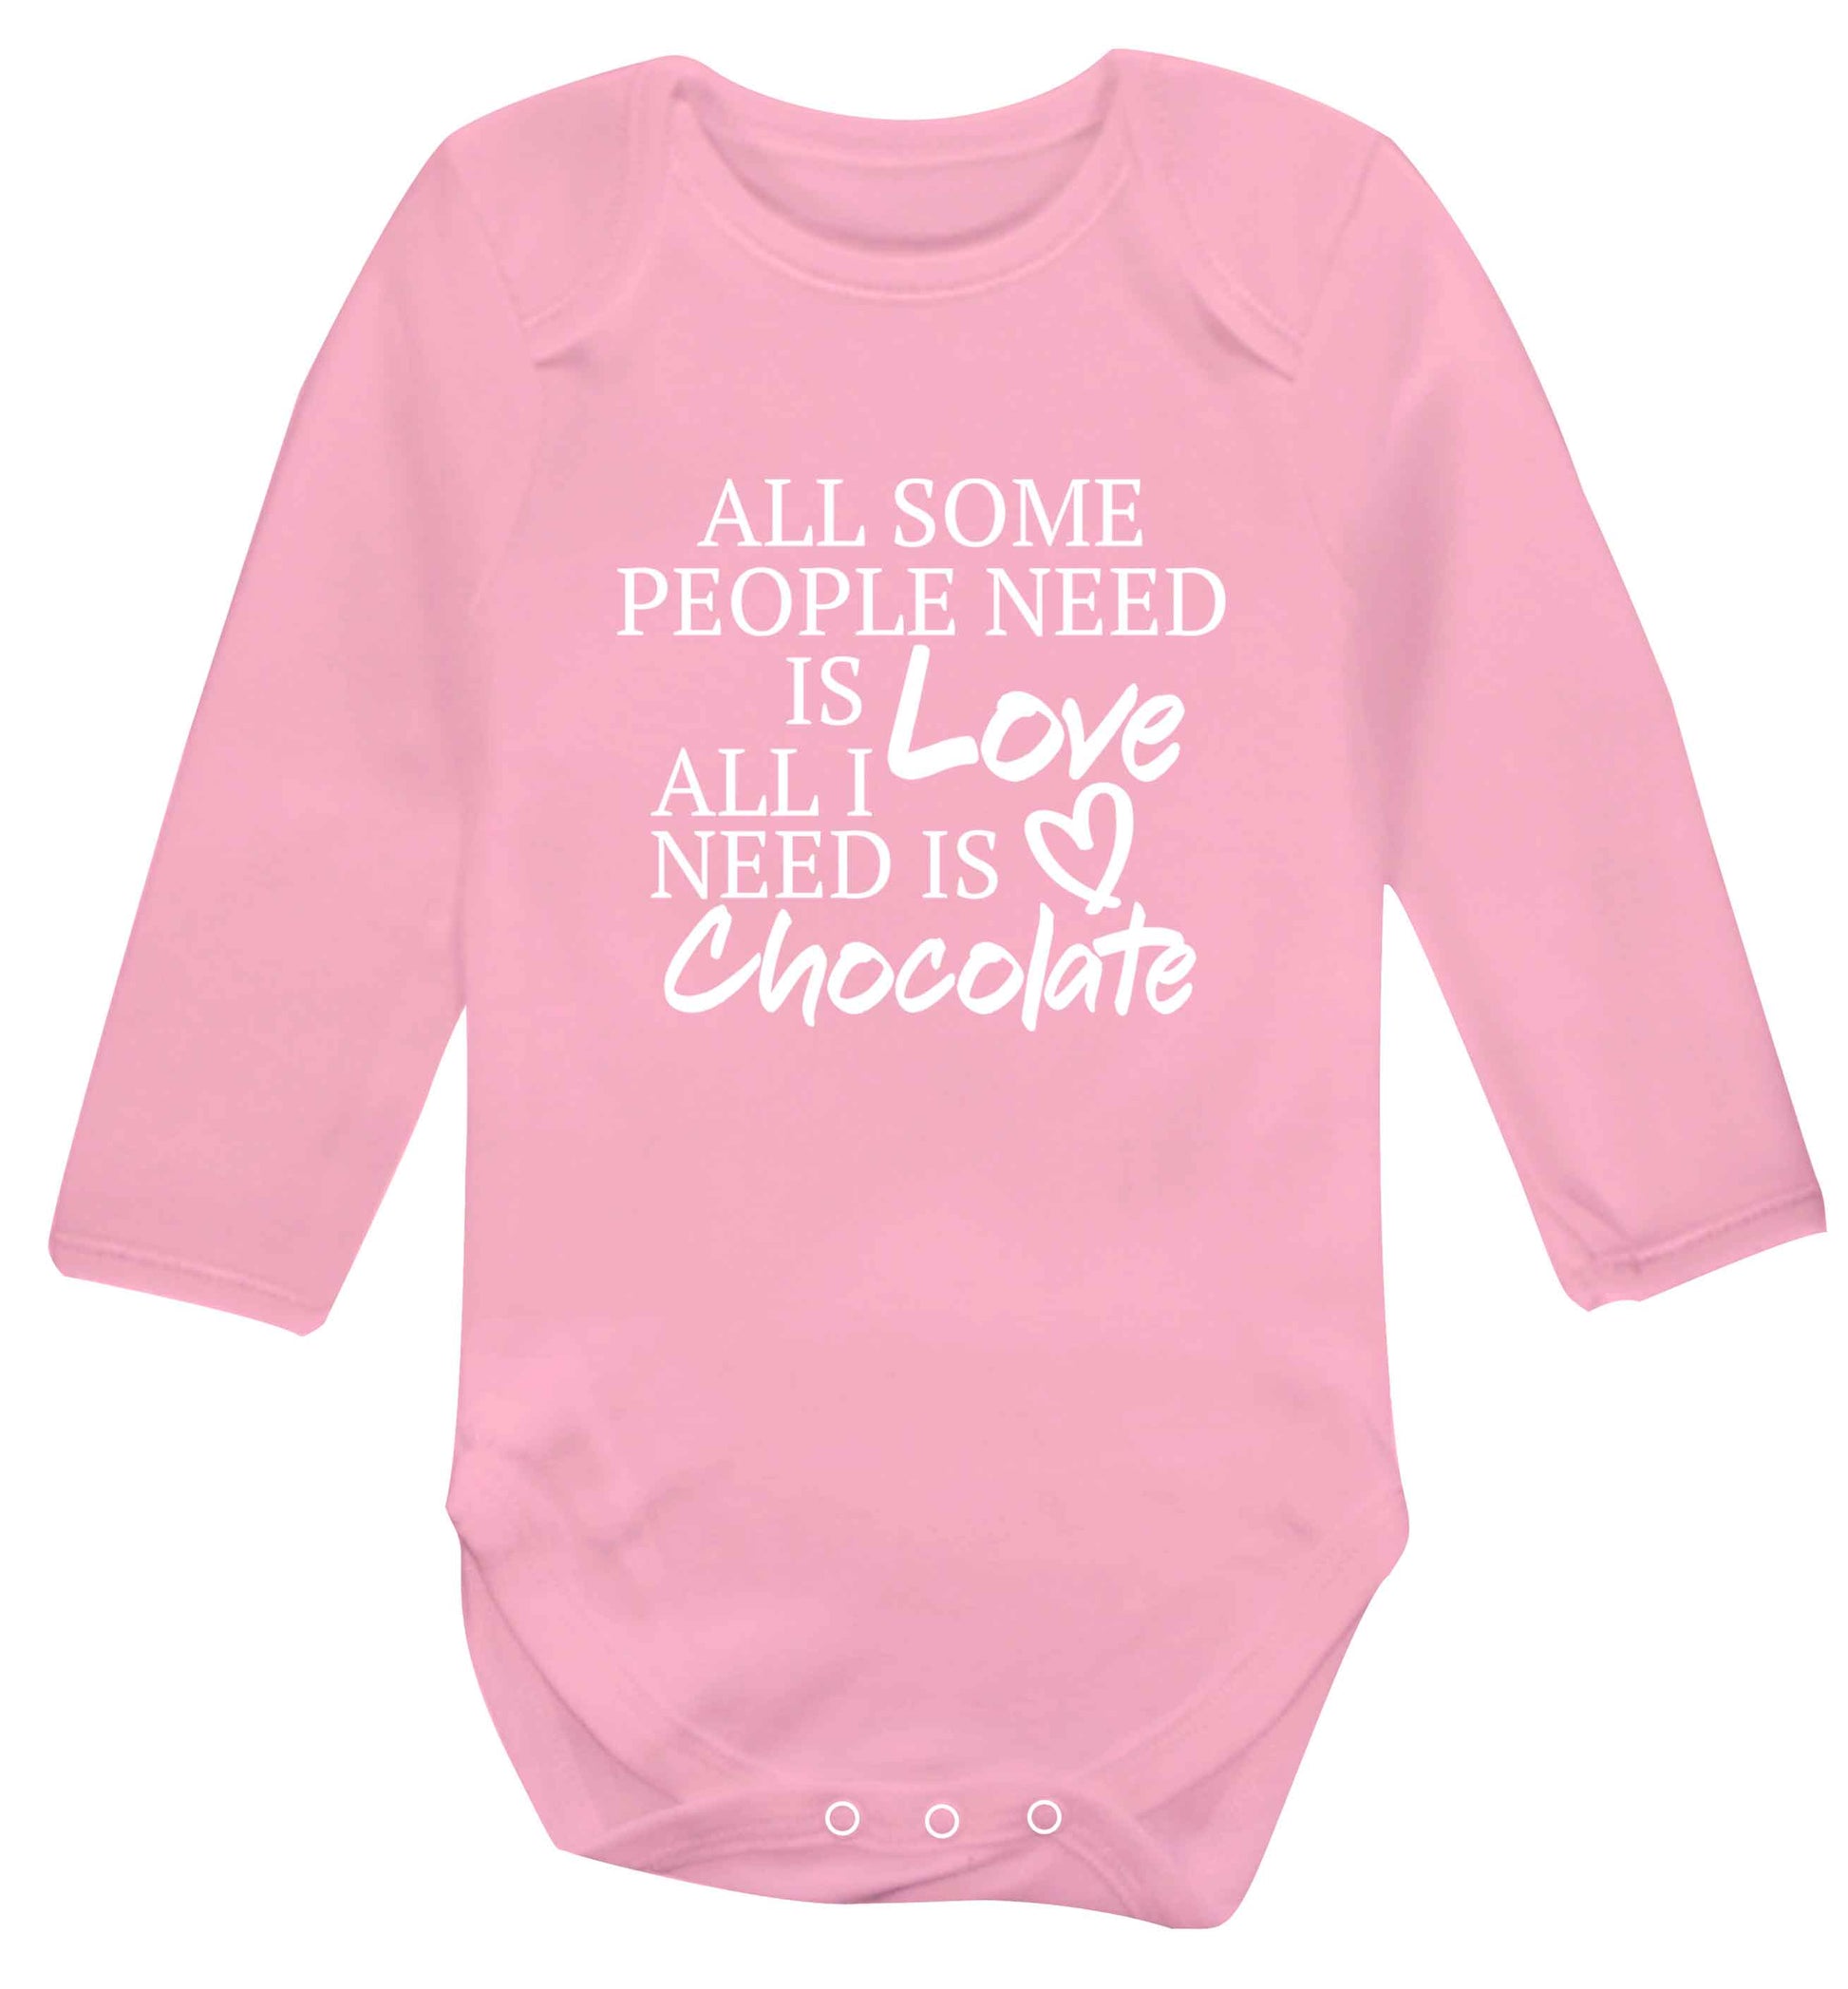 All some people need is love all I need is chocolate baby vest long sleeved pale pink 6-12 months